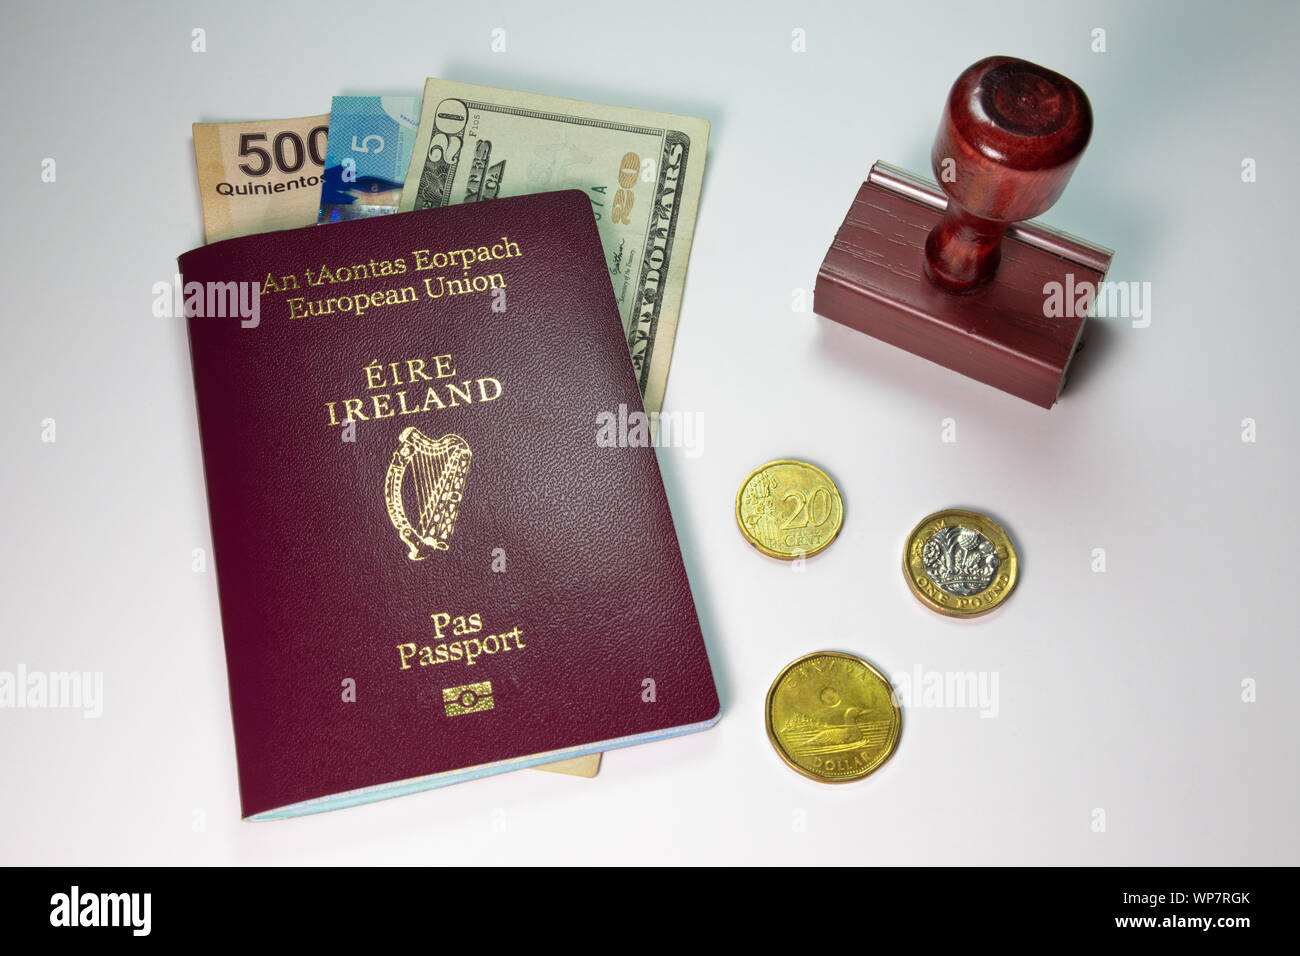 Travel Concept with red maroon or burgundy colour Irish Passport, Stamp and Foreign Currency displayed on a plain background Stock Photo